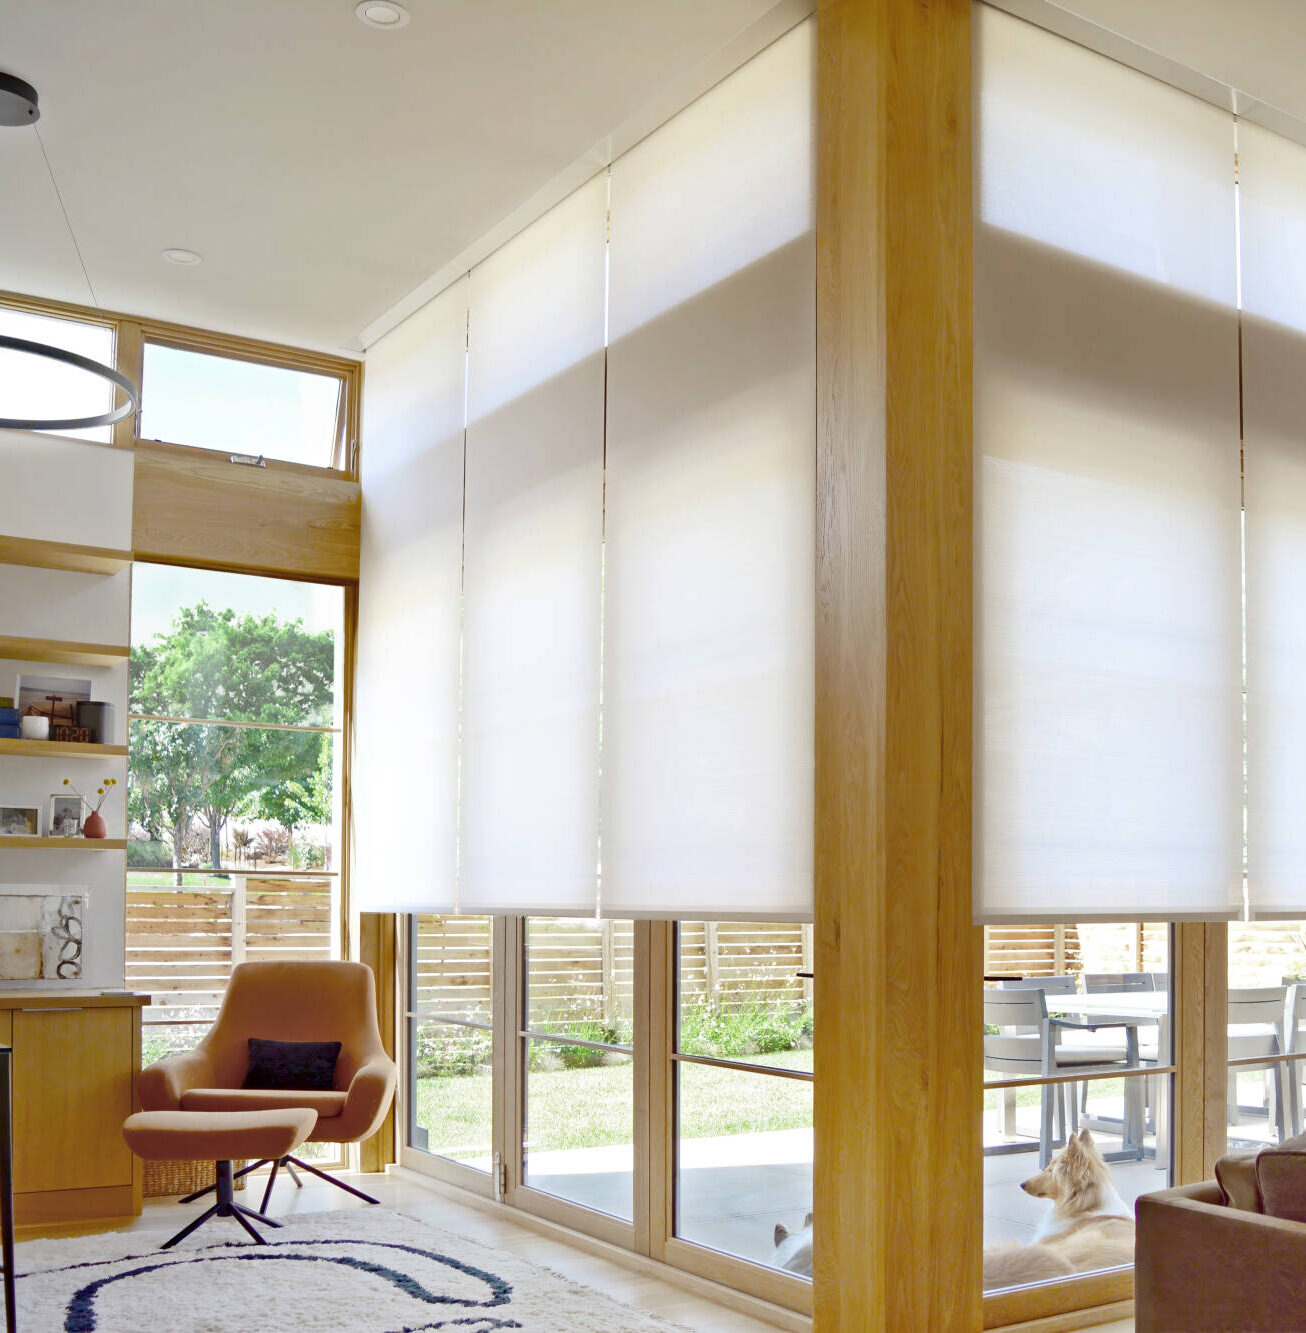 Insolroll elements shades with motorization